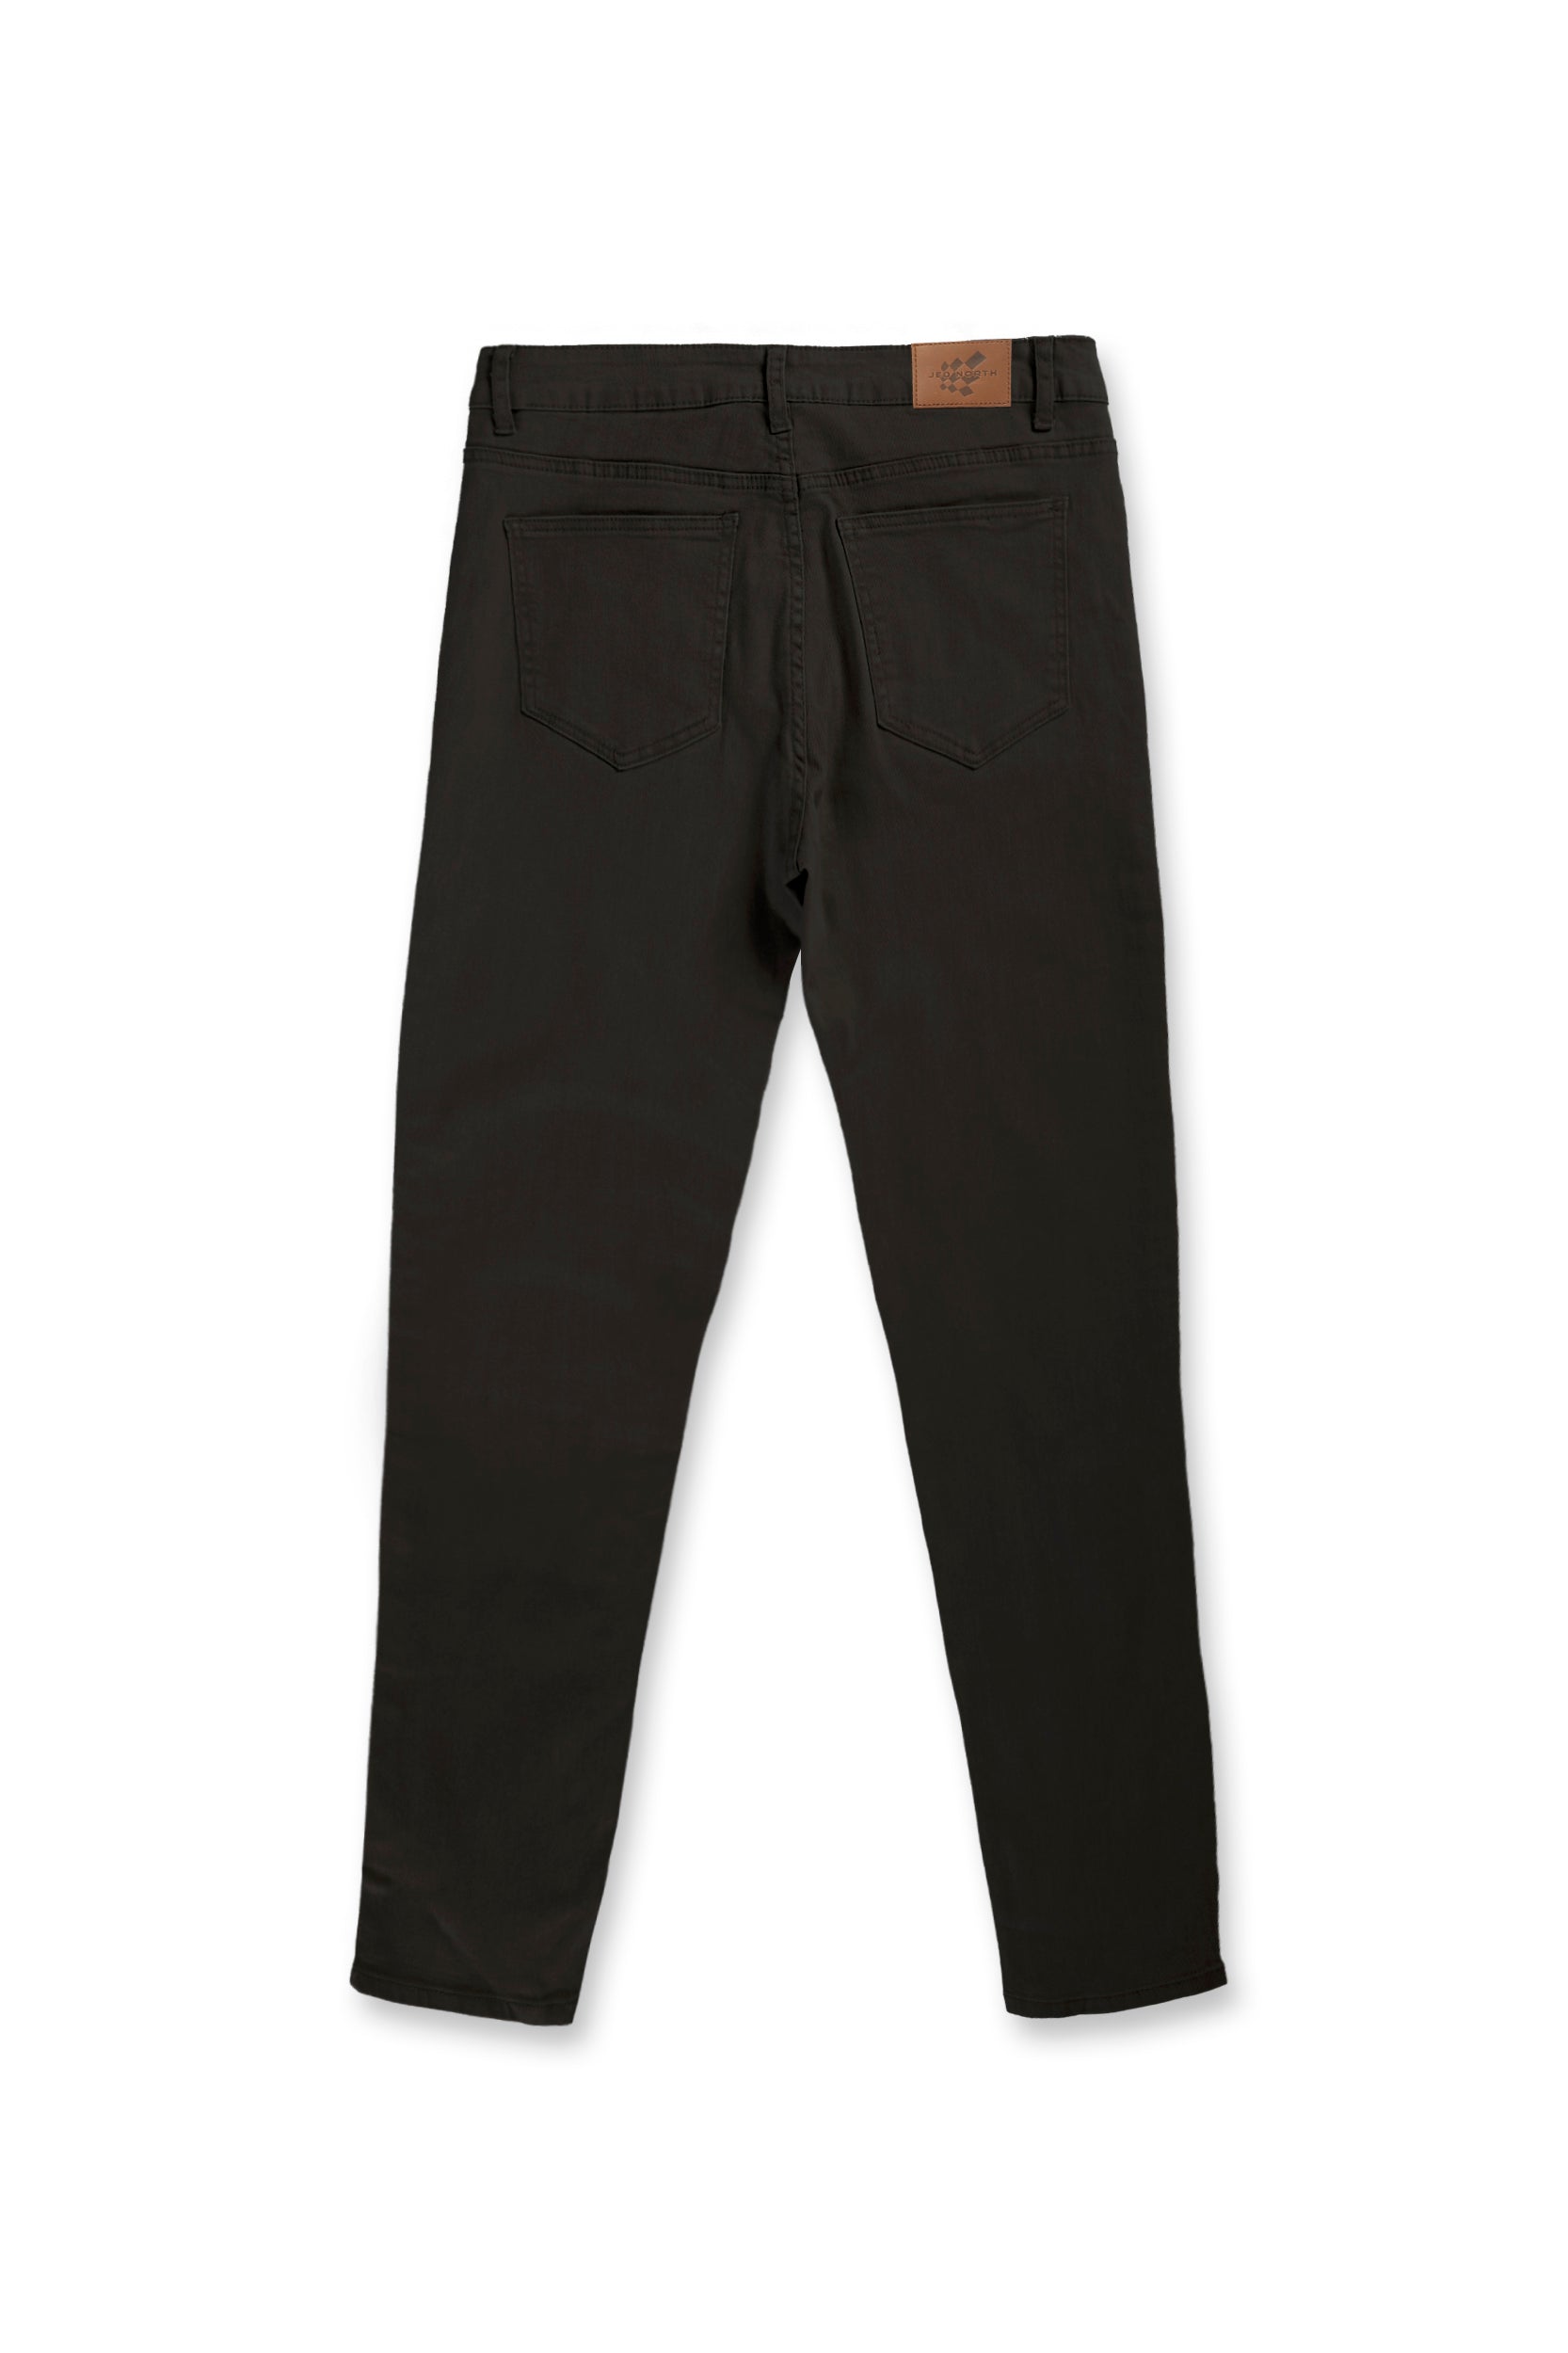 Men's Fitted Stretchy Pants - Black